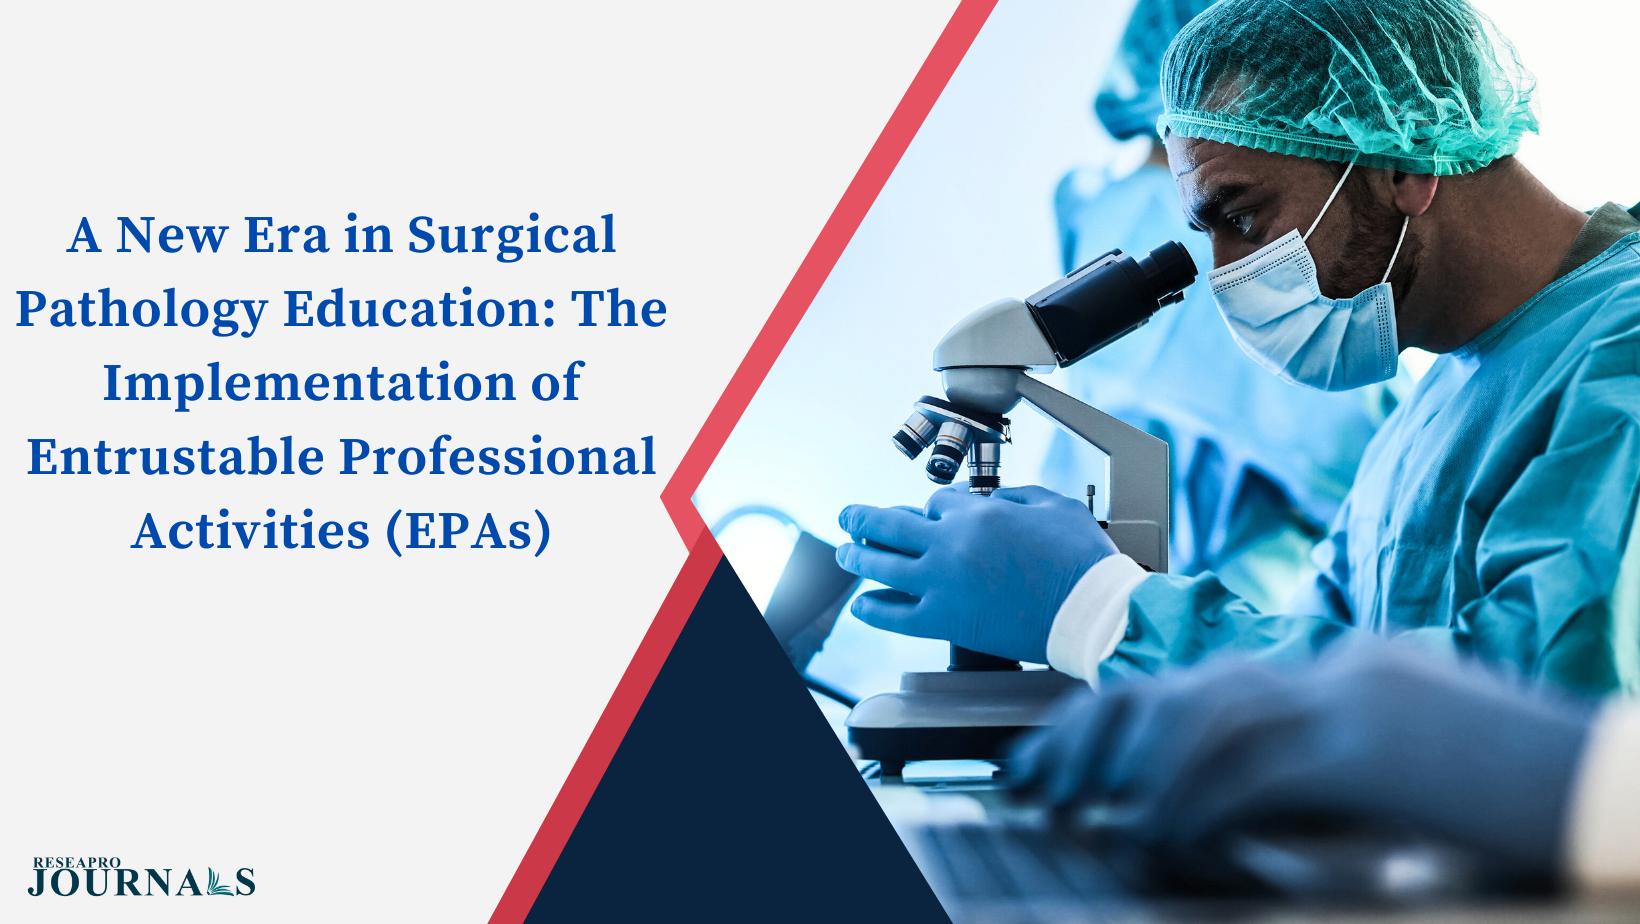 A New Era in Surgical Pathology Education: The Implementation of Entrustable Professional Activities (EPAs)